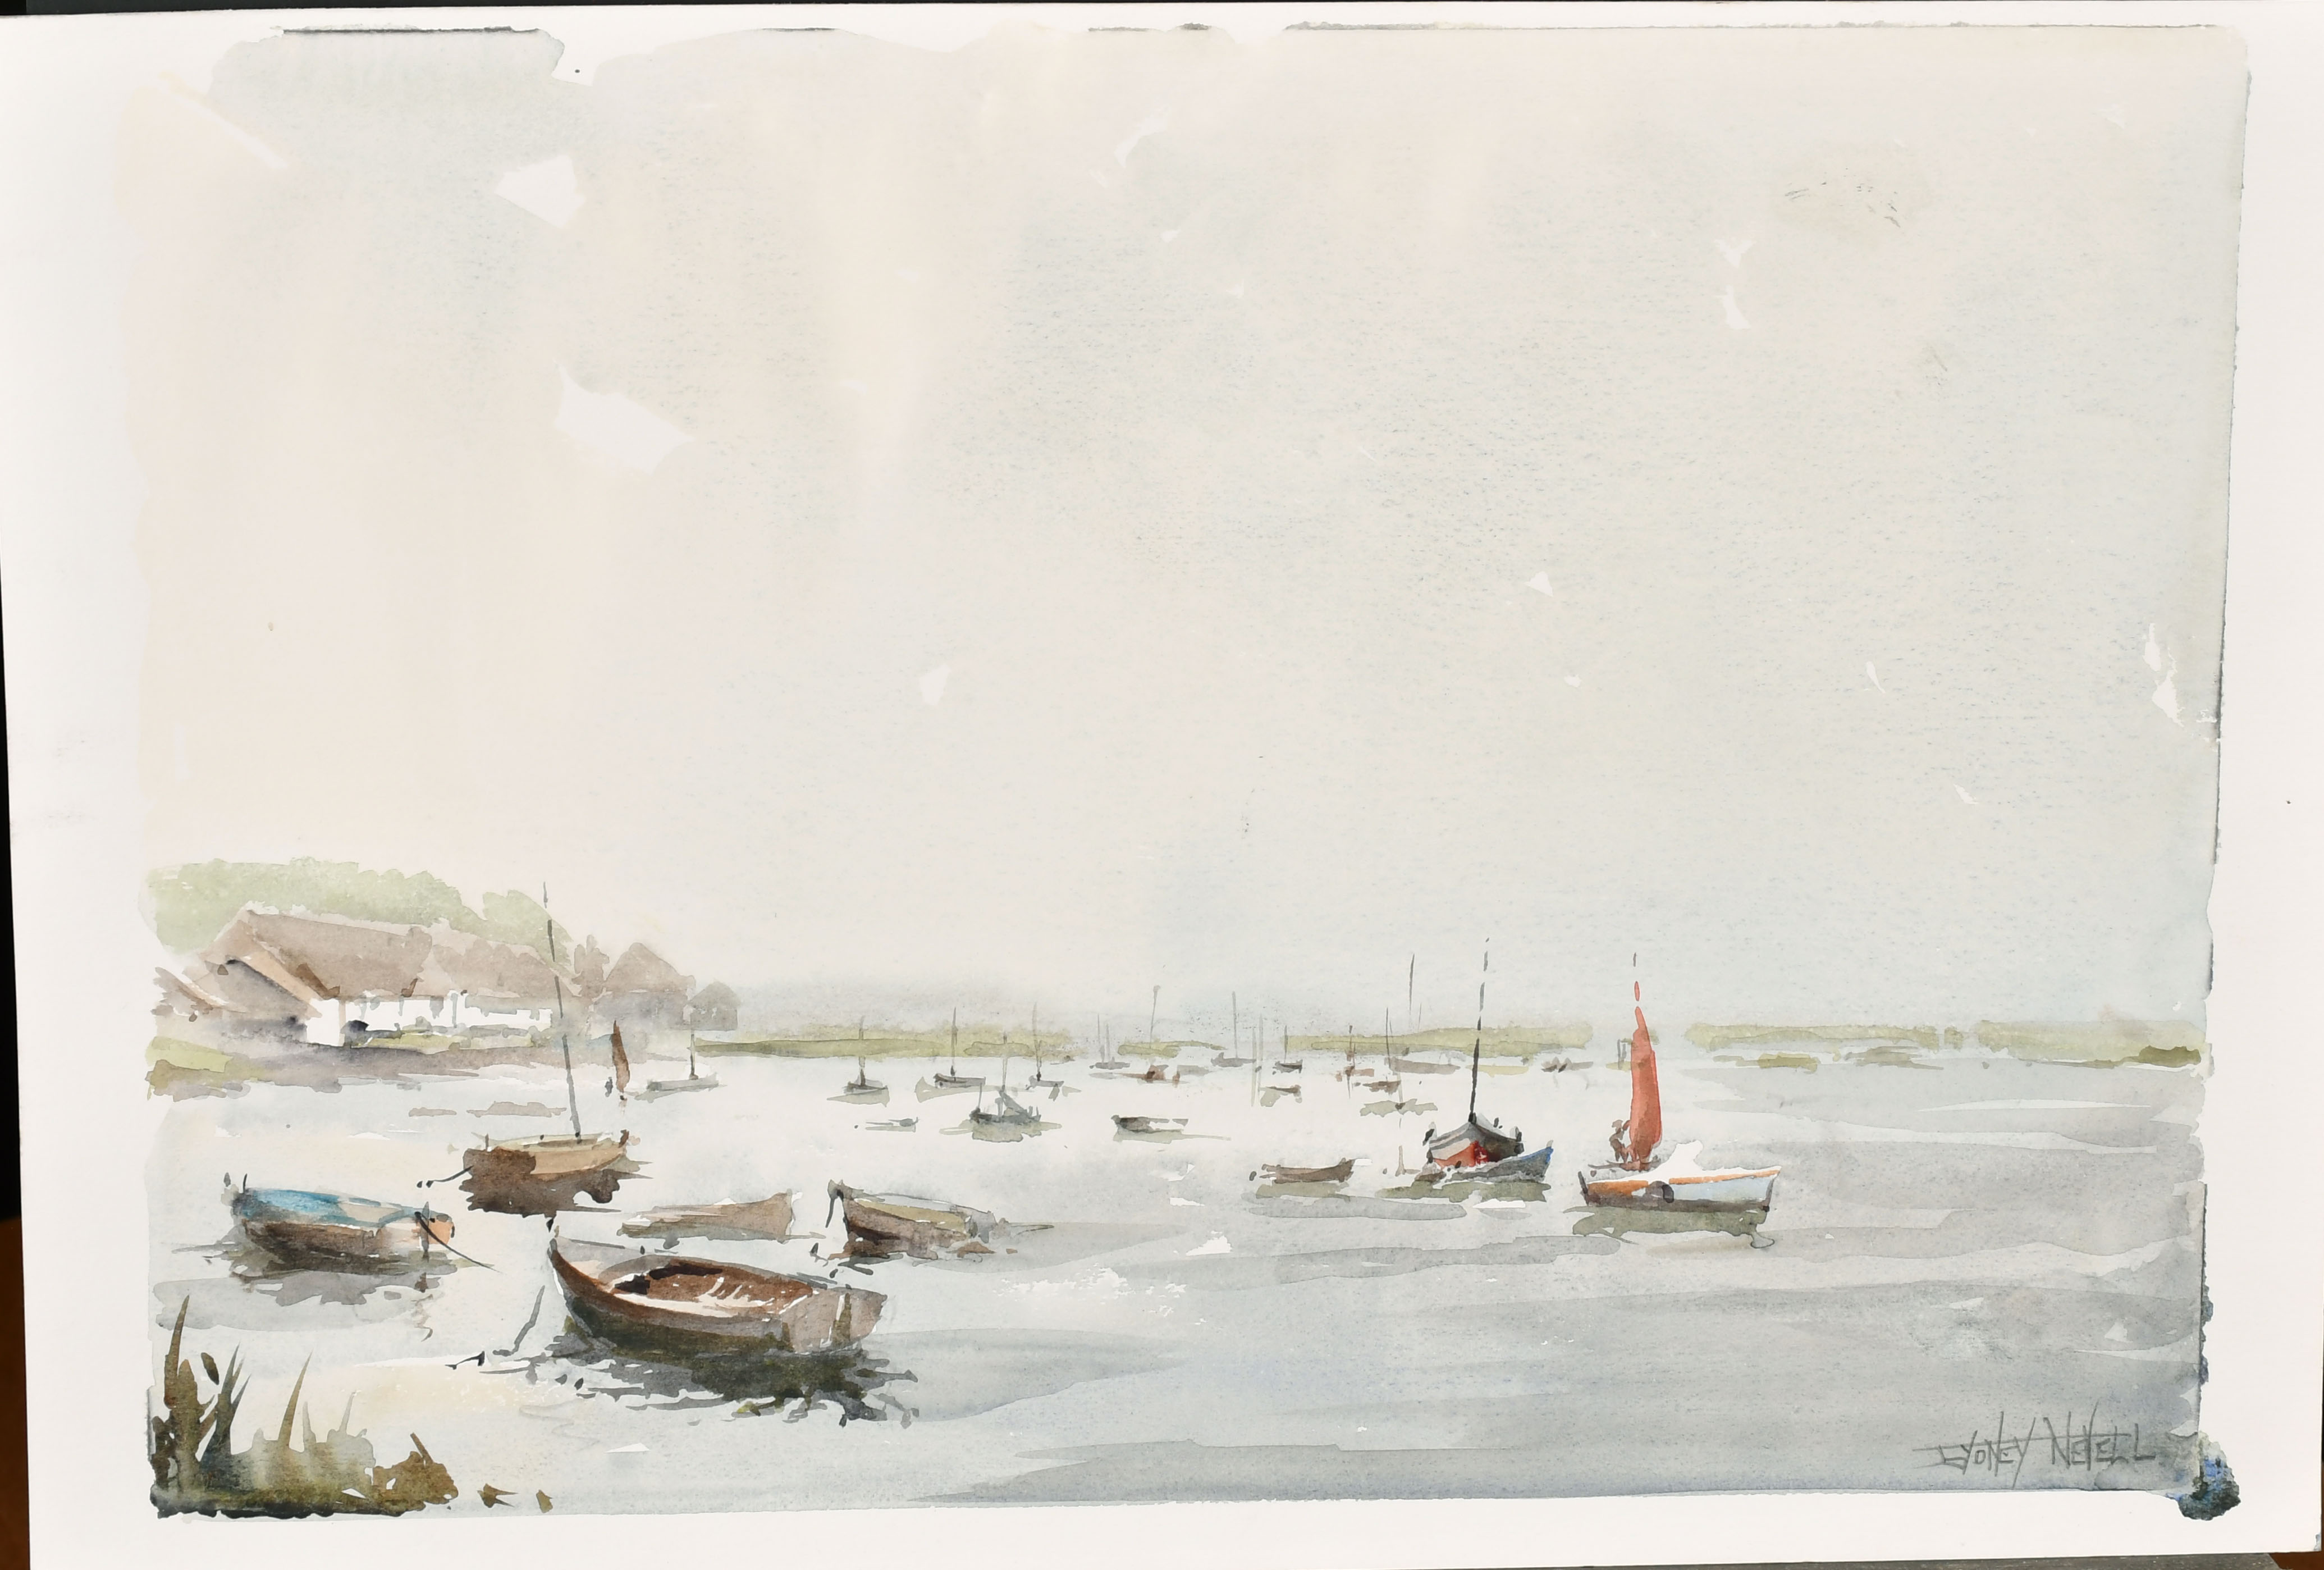 Sydney Nevell (20th Century) British. Boats in an Estuary, Watercolour, Signed in pencil, Unframed - Image 2 of 10